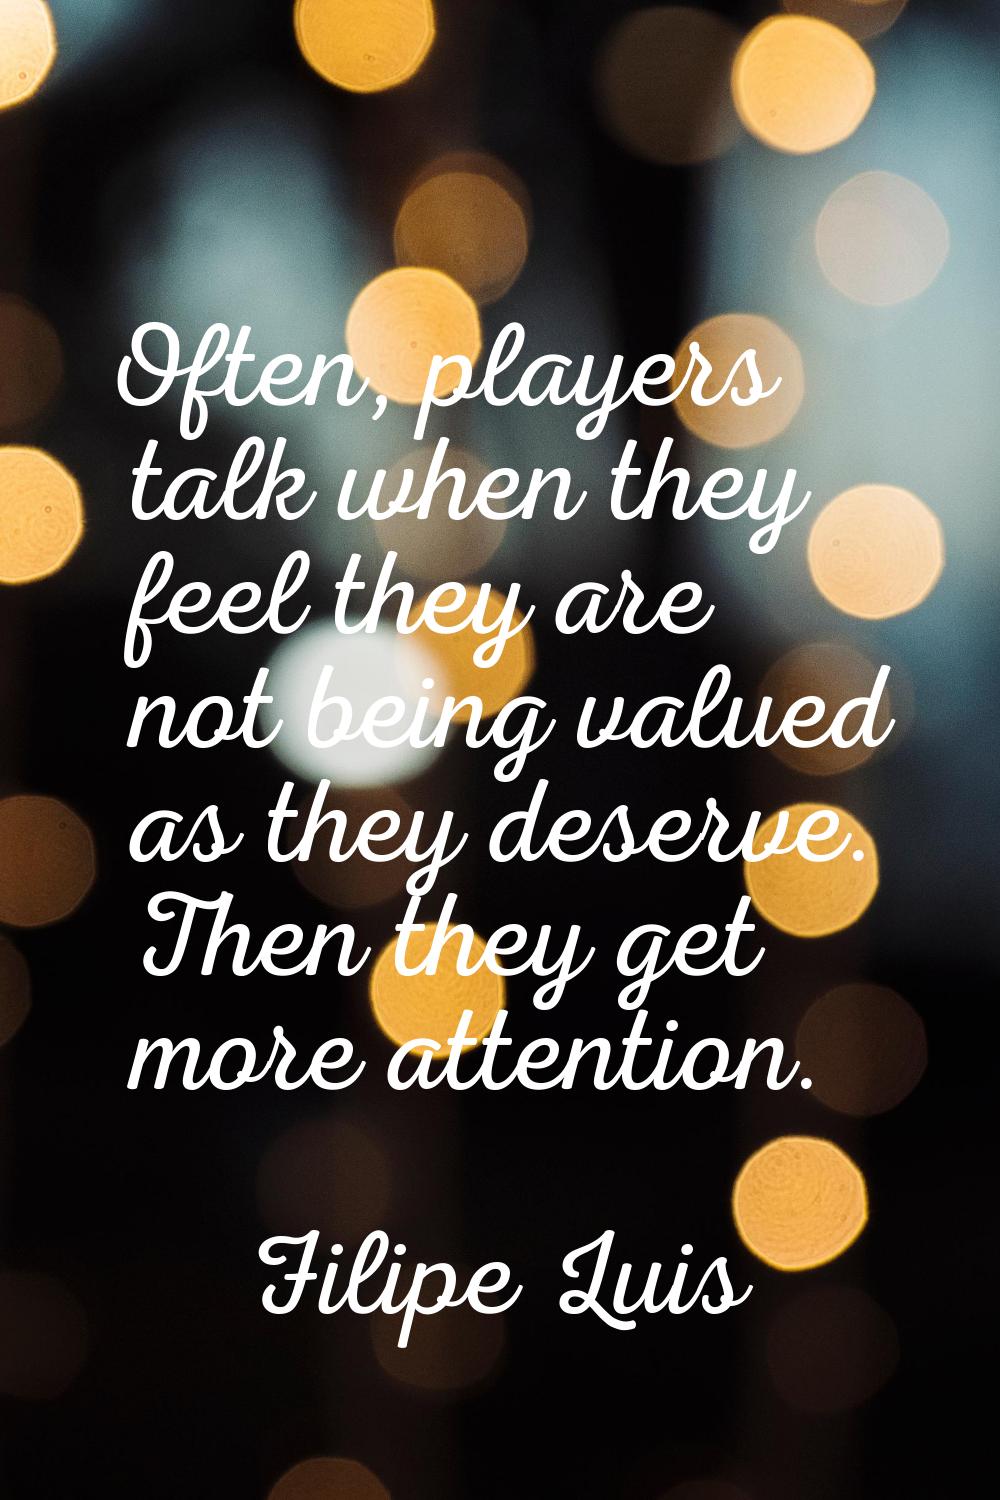 Often, players talk when they feel they are not being valued as they deserve. Then they get more at